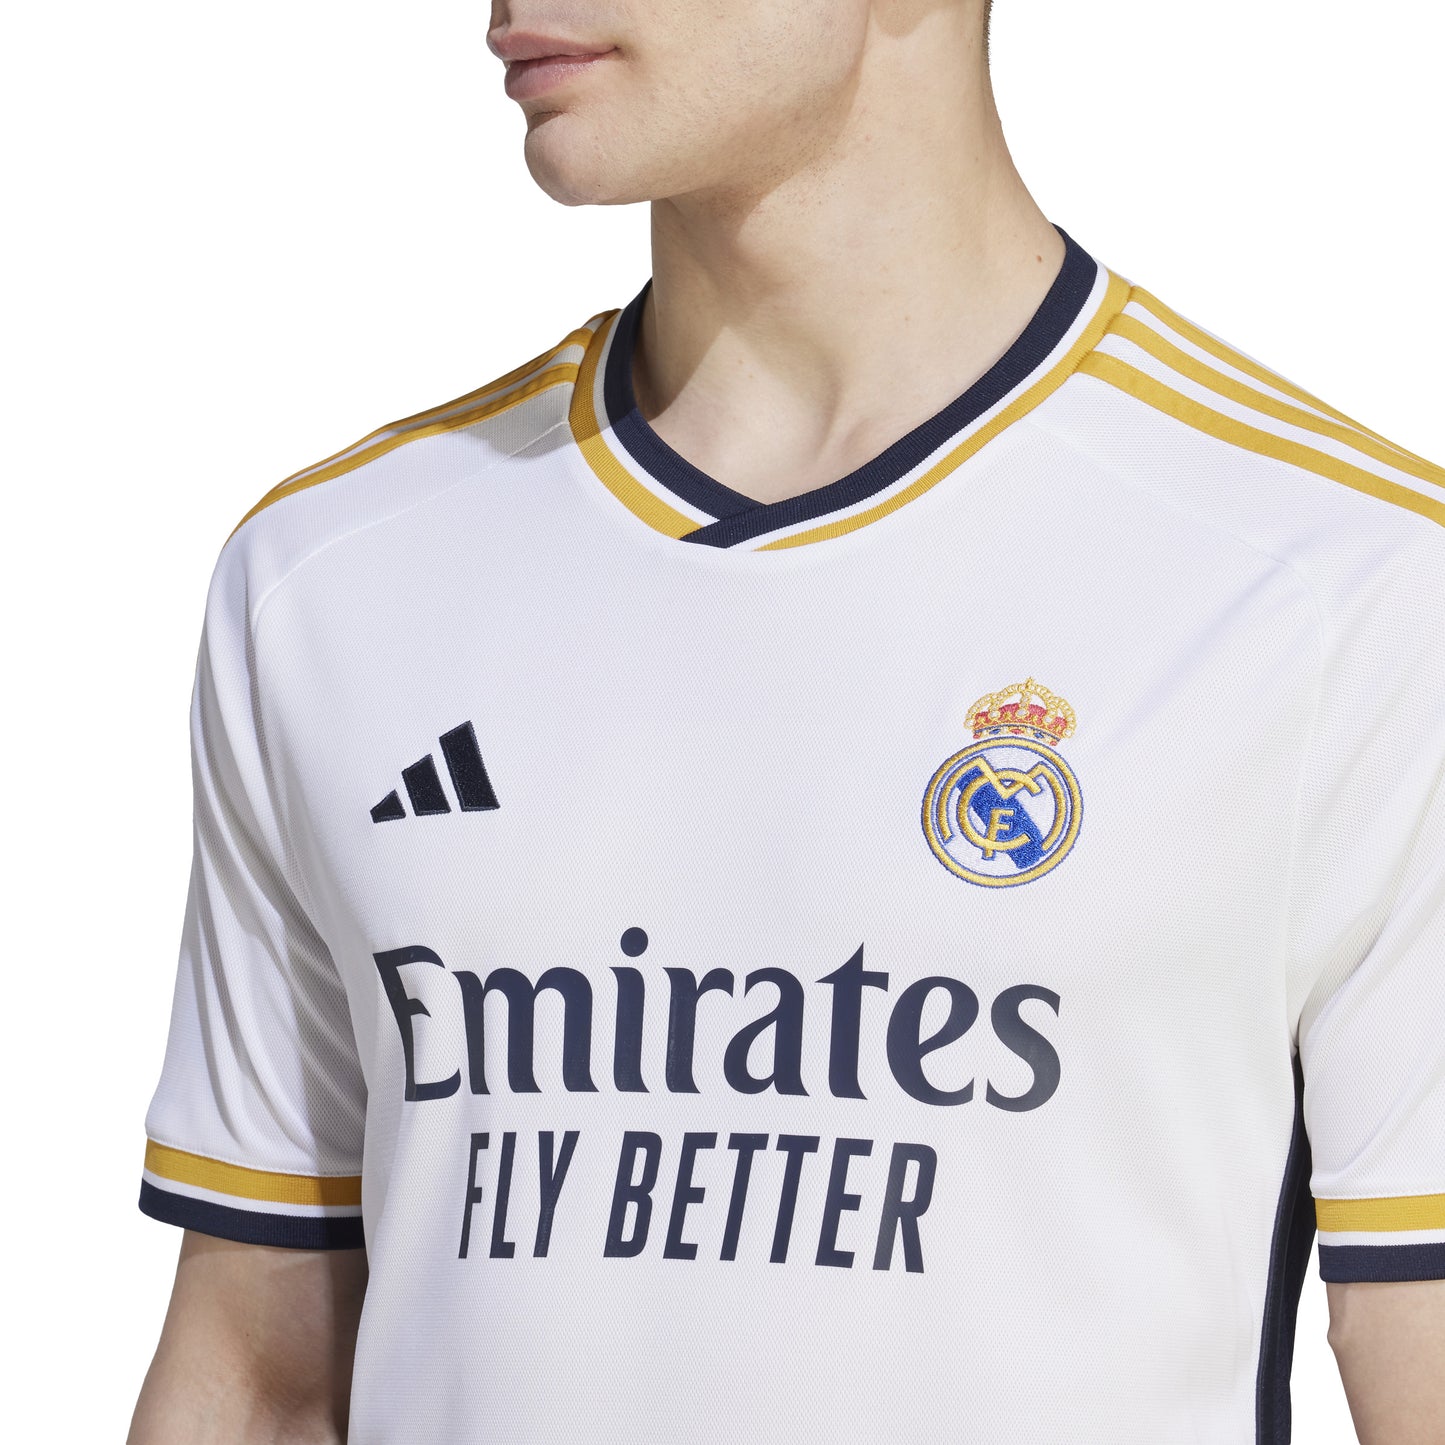 Adidas Real Madrid 23/24 Home Jersey